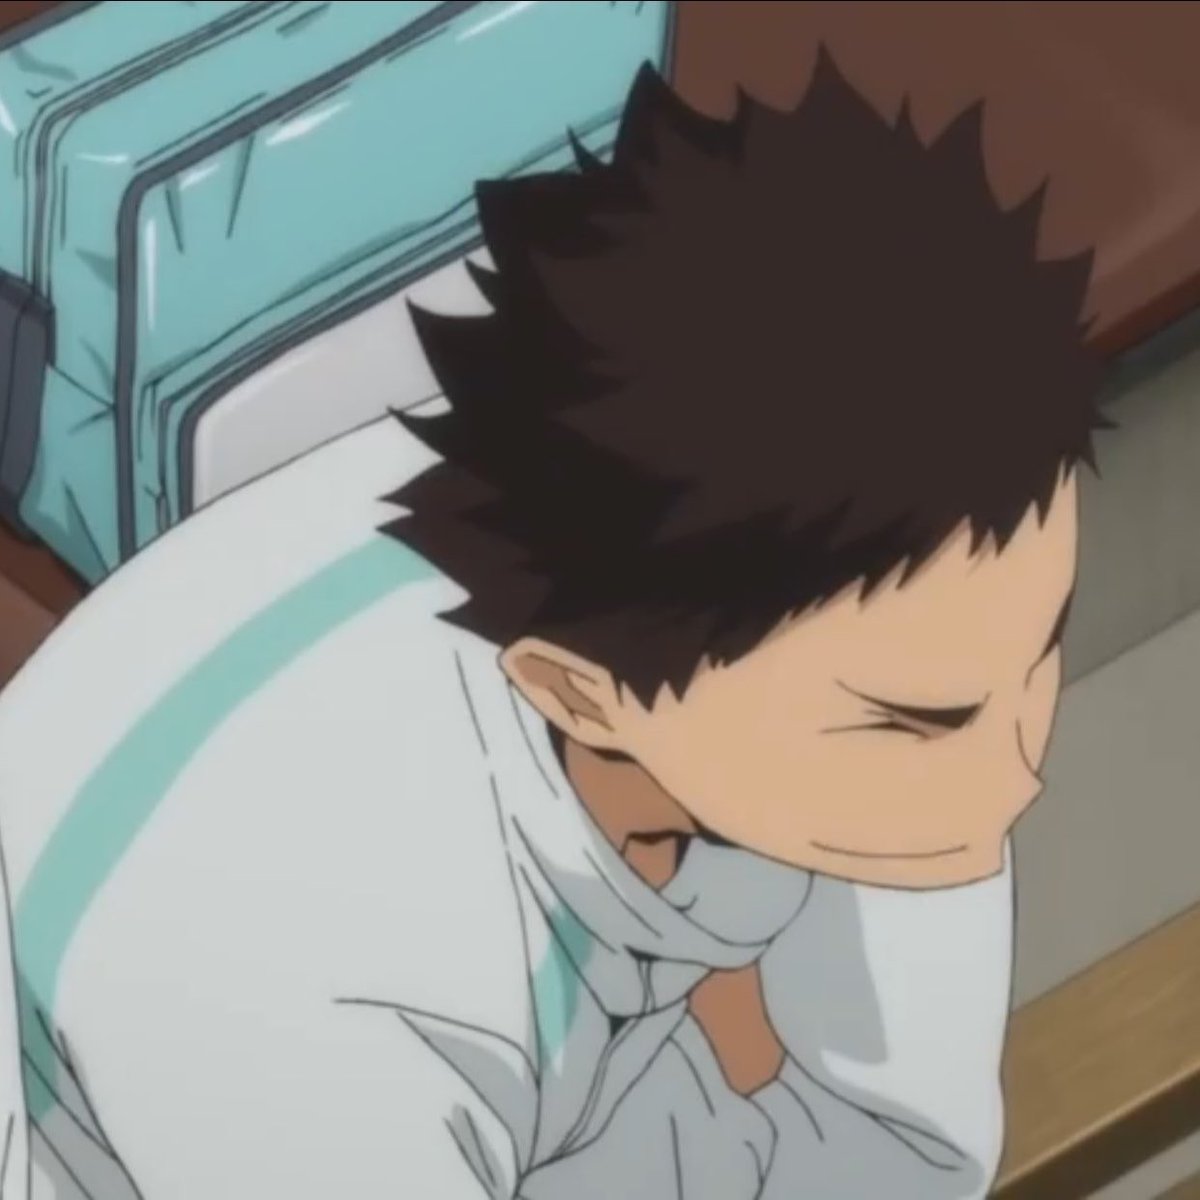 the way iwa's whole face scrunches up when he smiles :( 